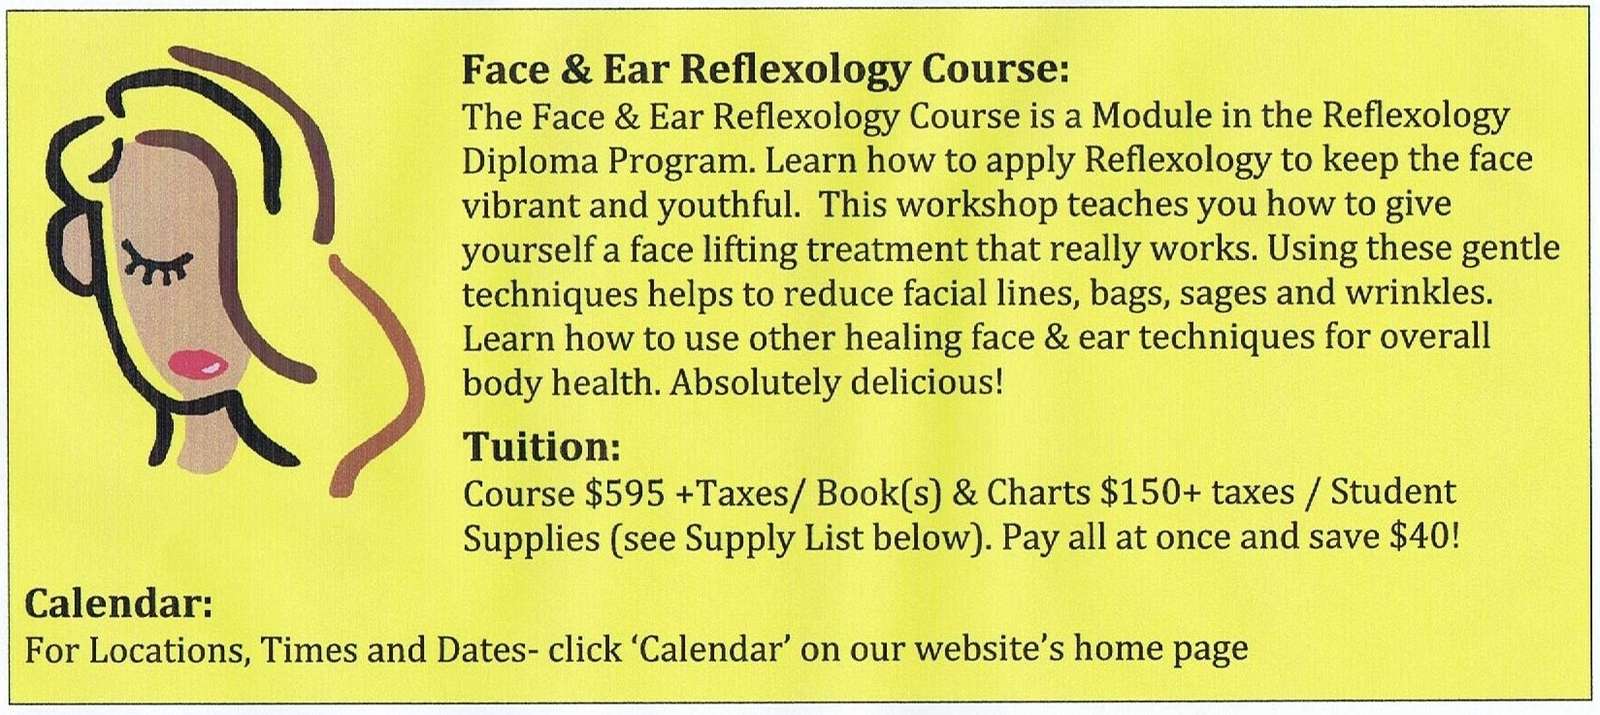 A poster with information about the Face and Ear Reflexology Program offered by Alberta massage school, Archways Healing College.